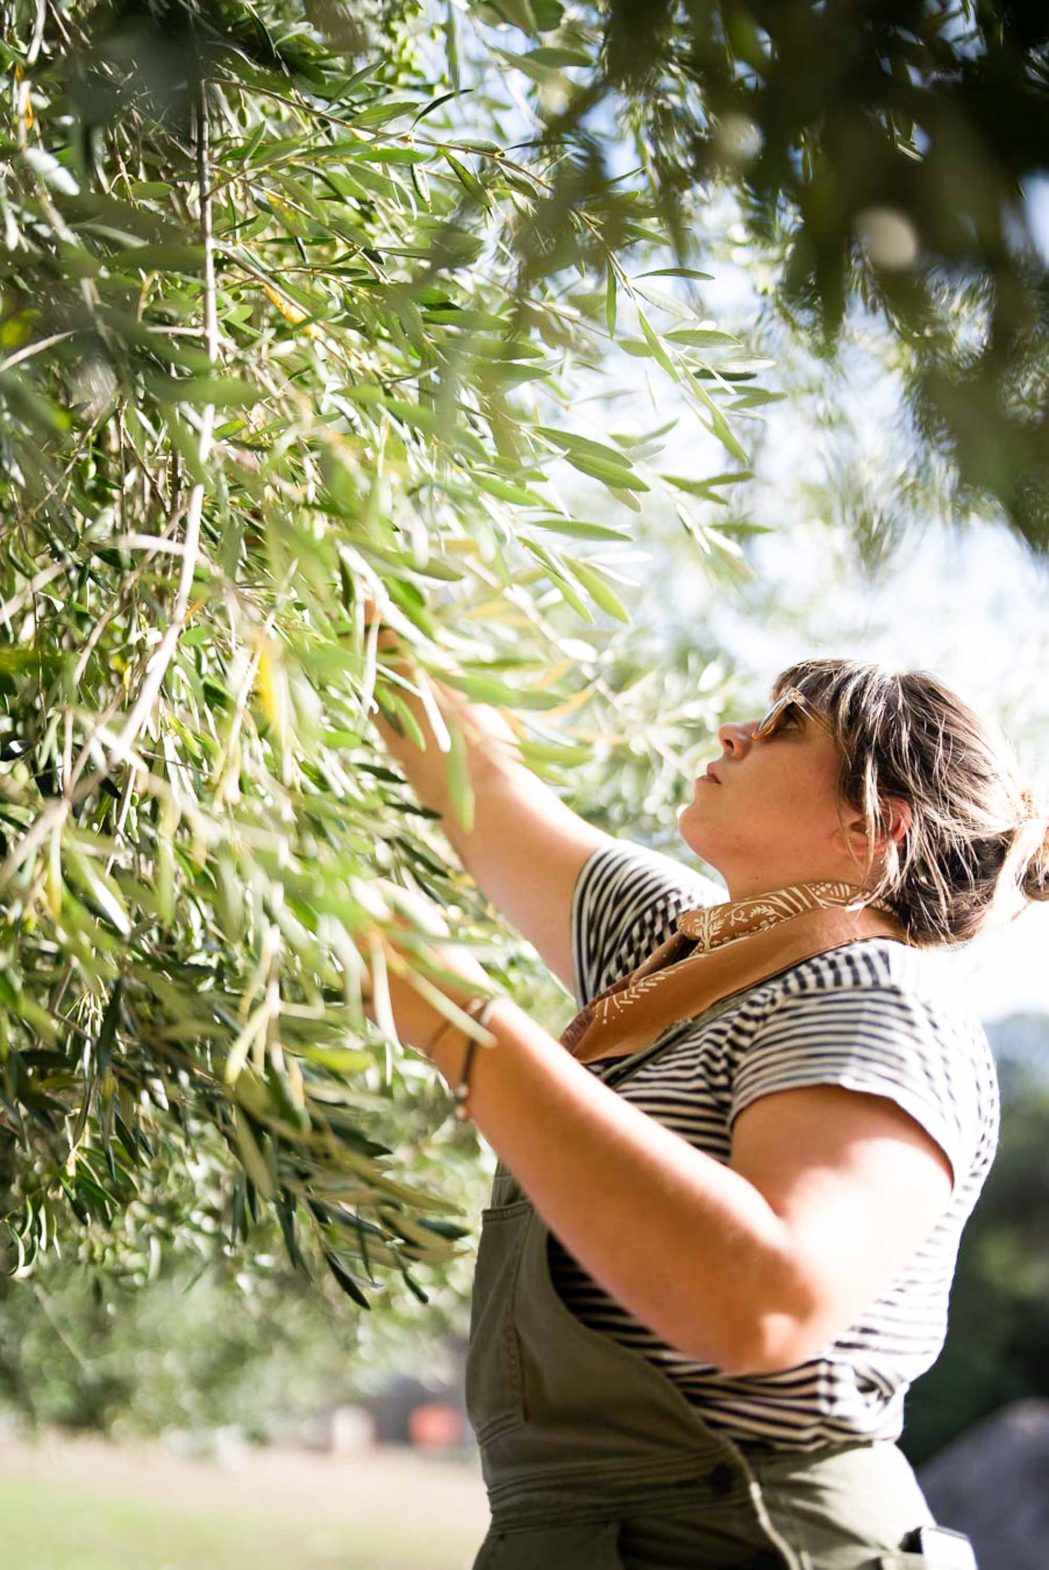 A woman reaches up to pick olives.